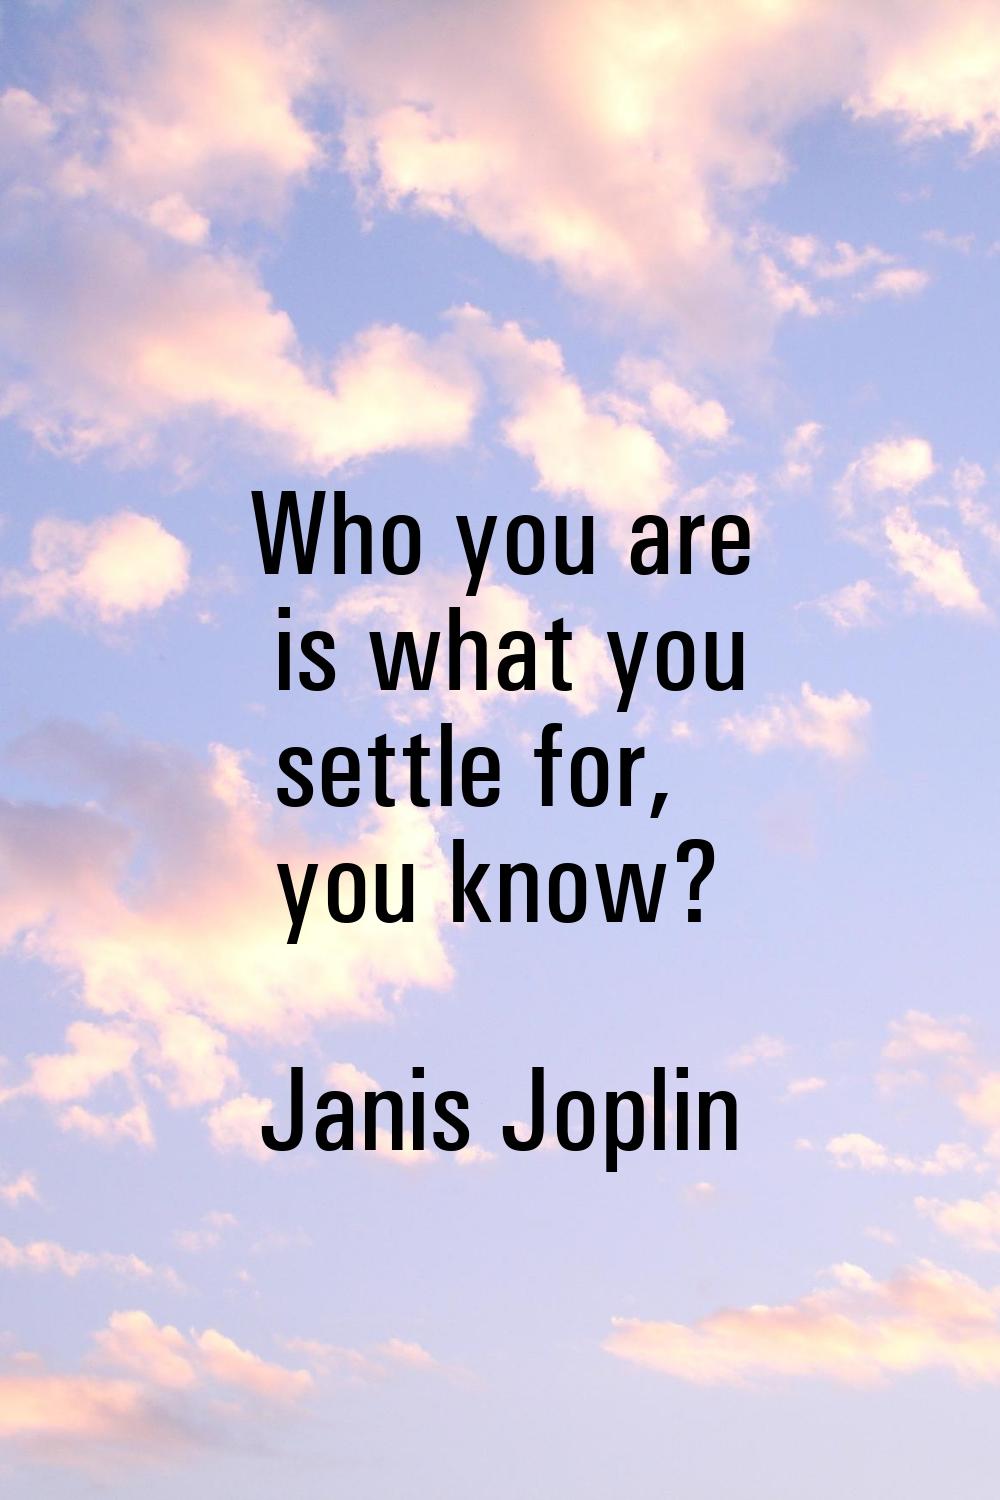 Who you are is what you settle for, you know?